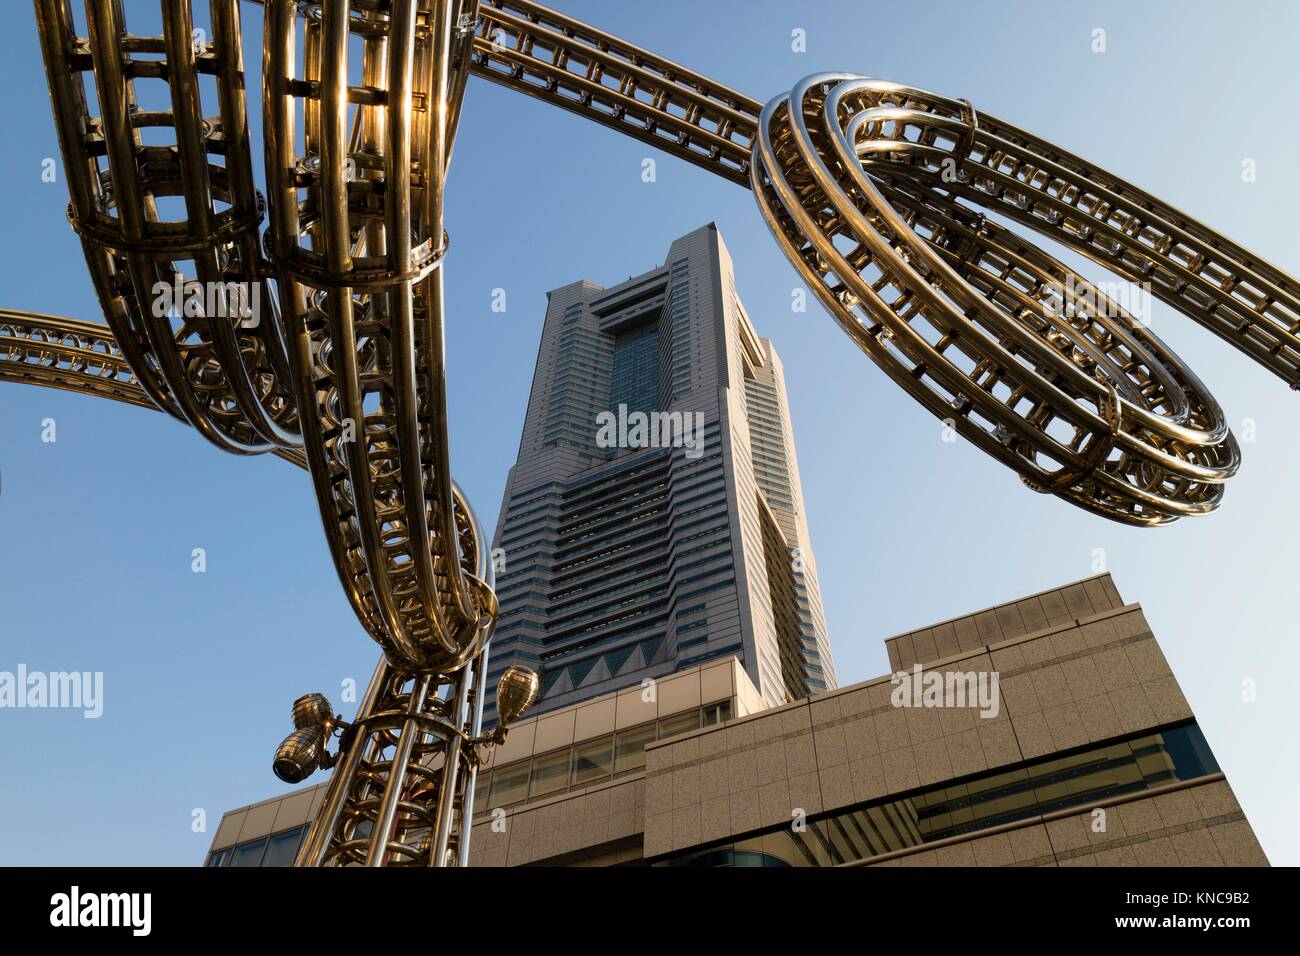 Yokohama, Japan - June 15, 2017: Futuristic stainless steel construction and the Landmark tower on Queen's Square shopping centre in Minato Mirai, Stock Photo